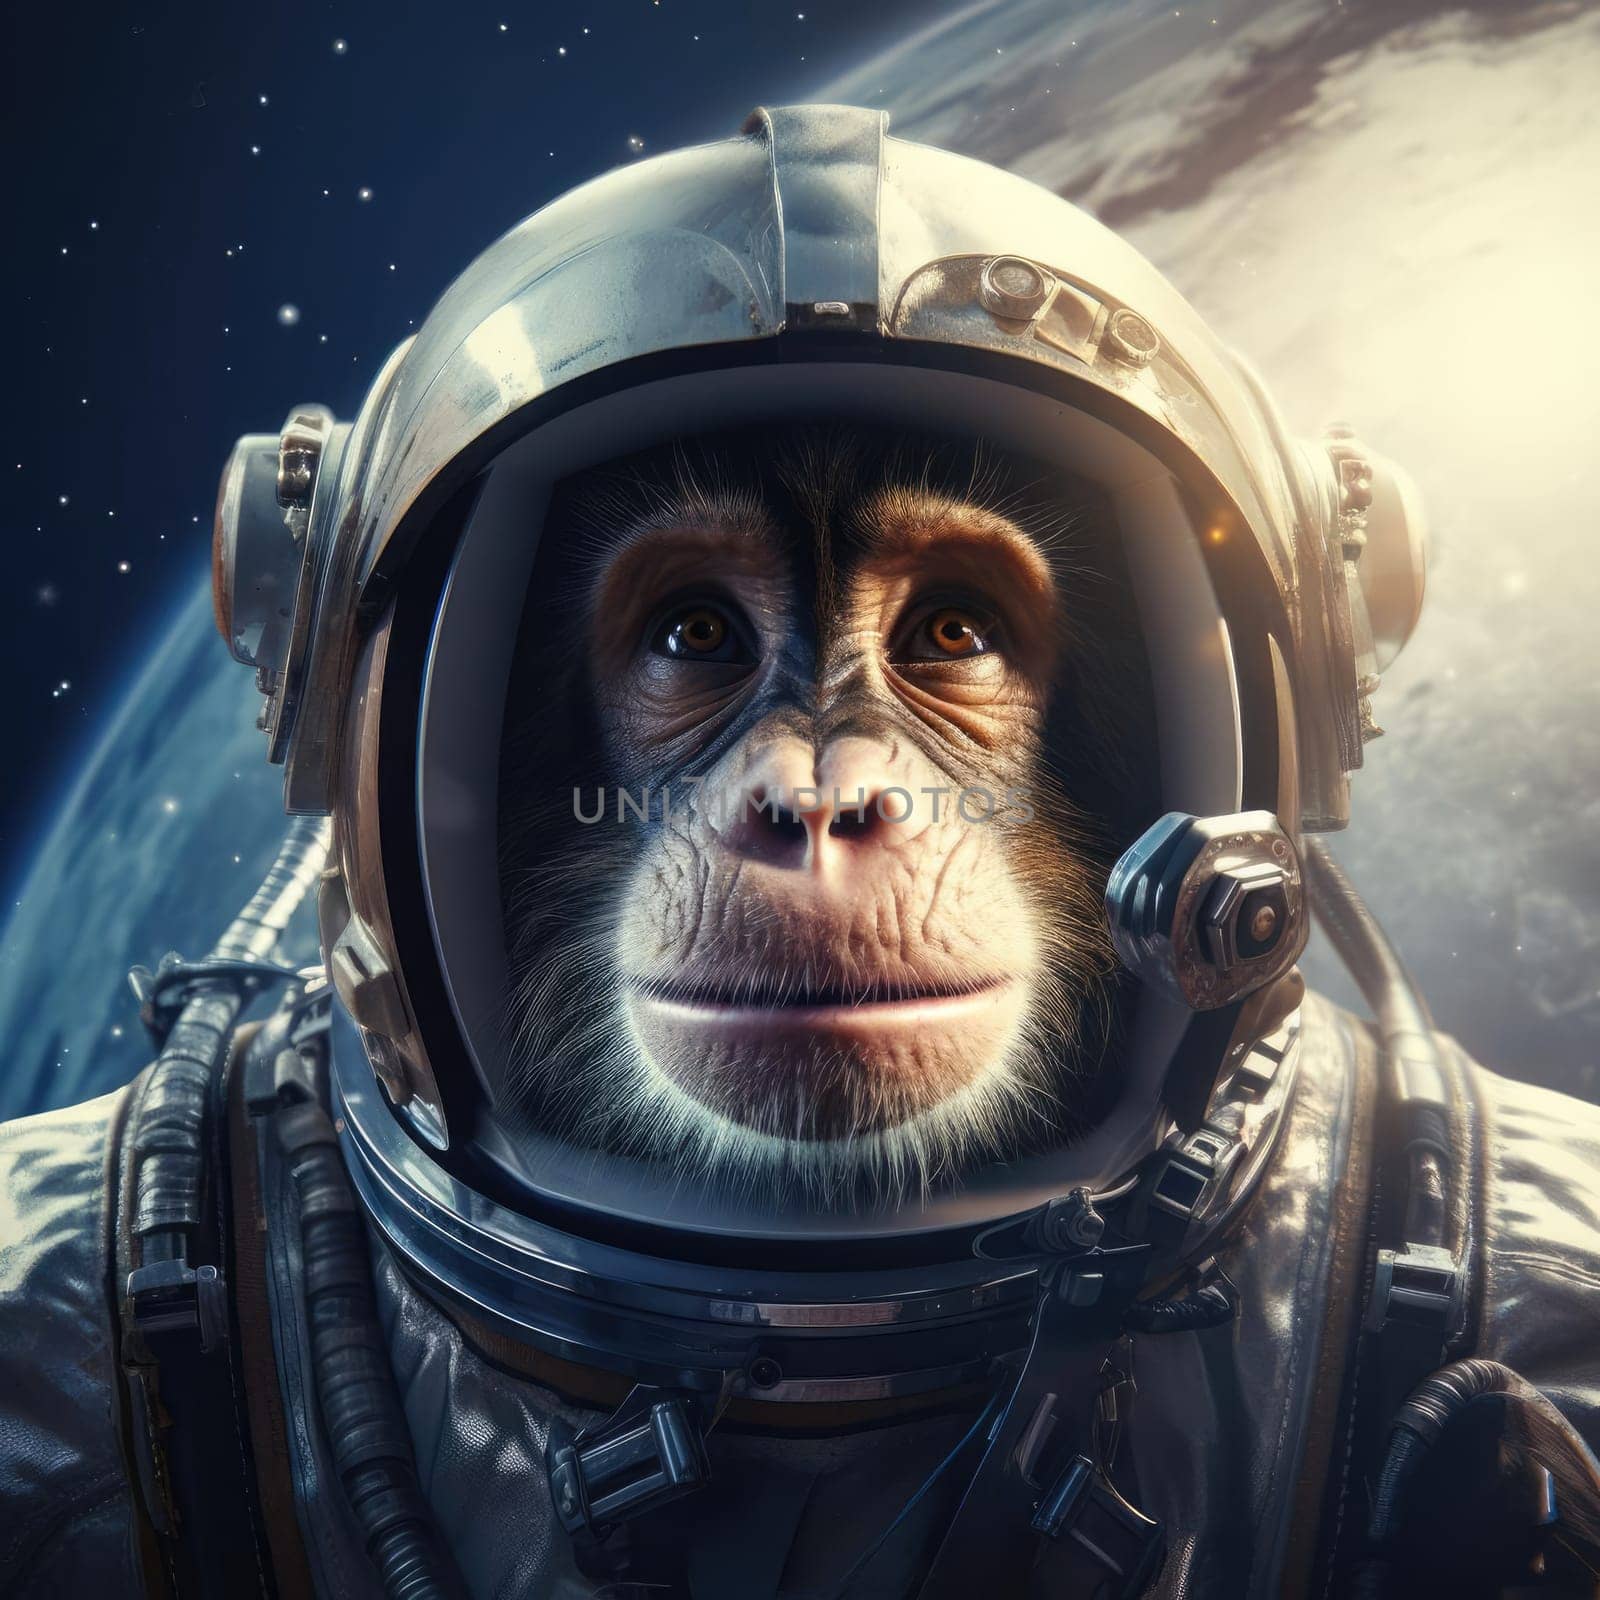 Monkey in space suit in space by cherezoff